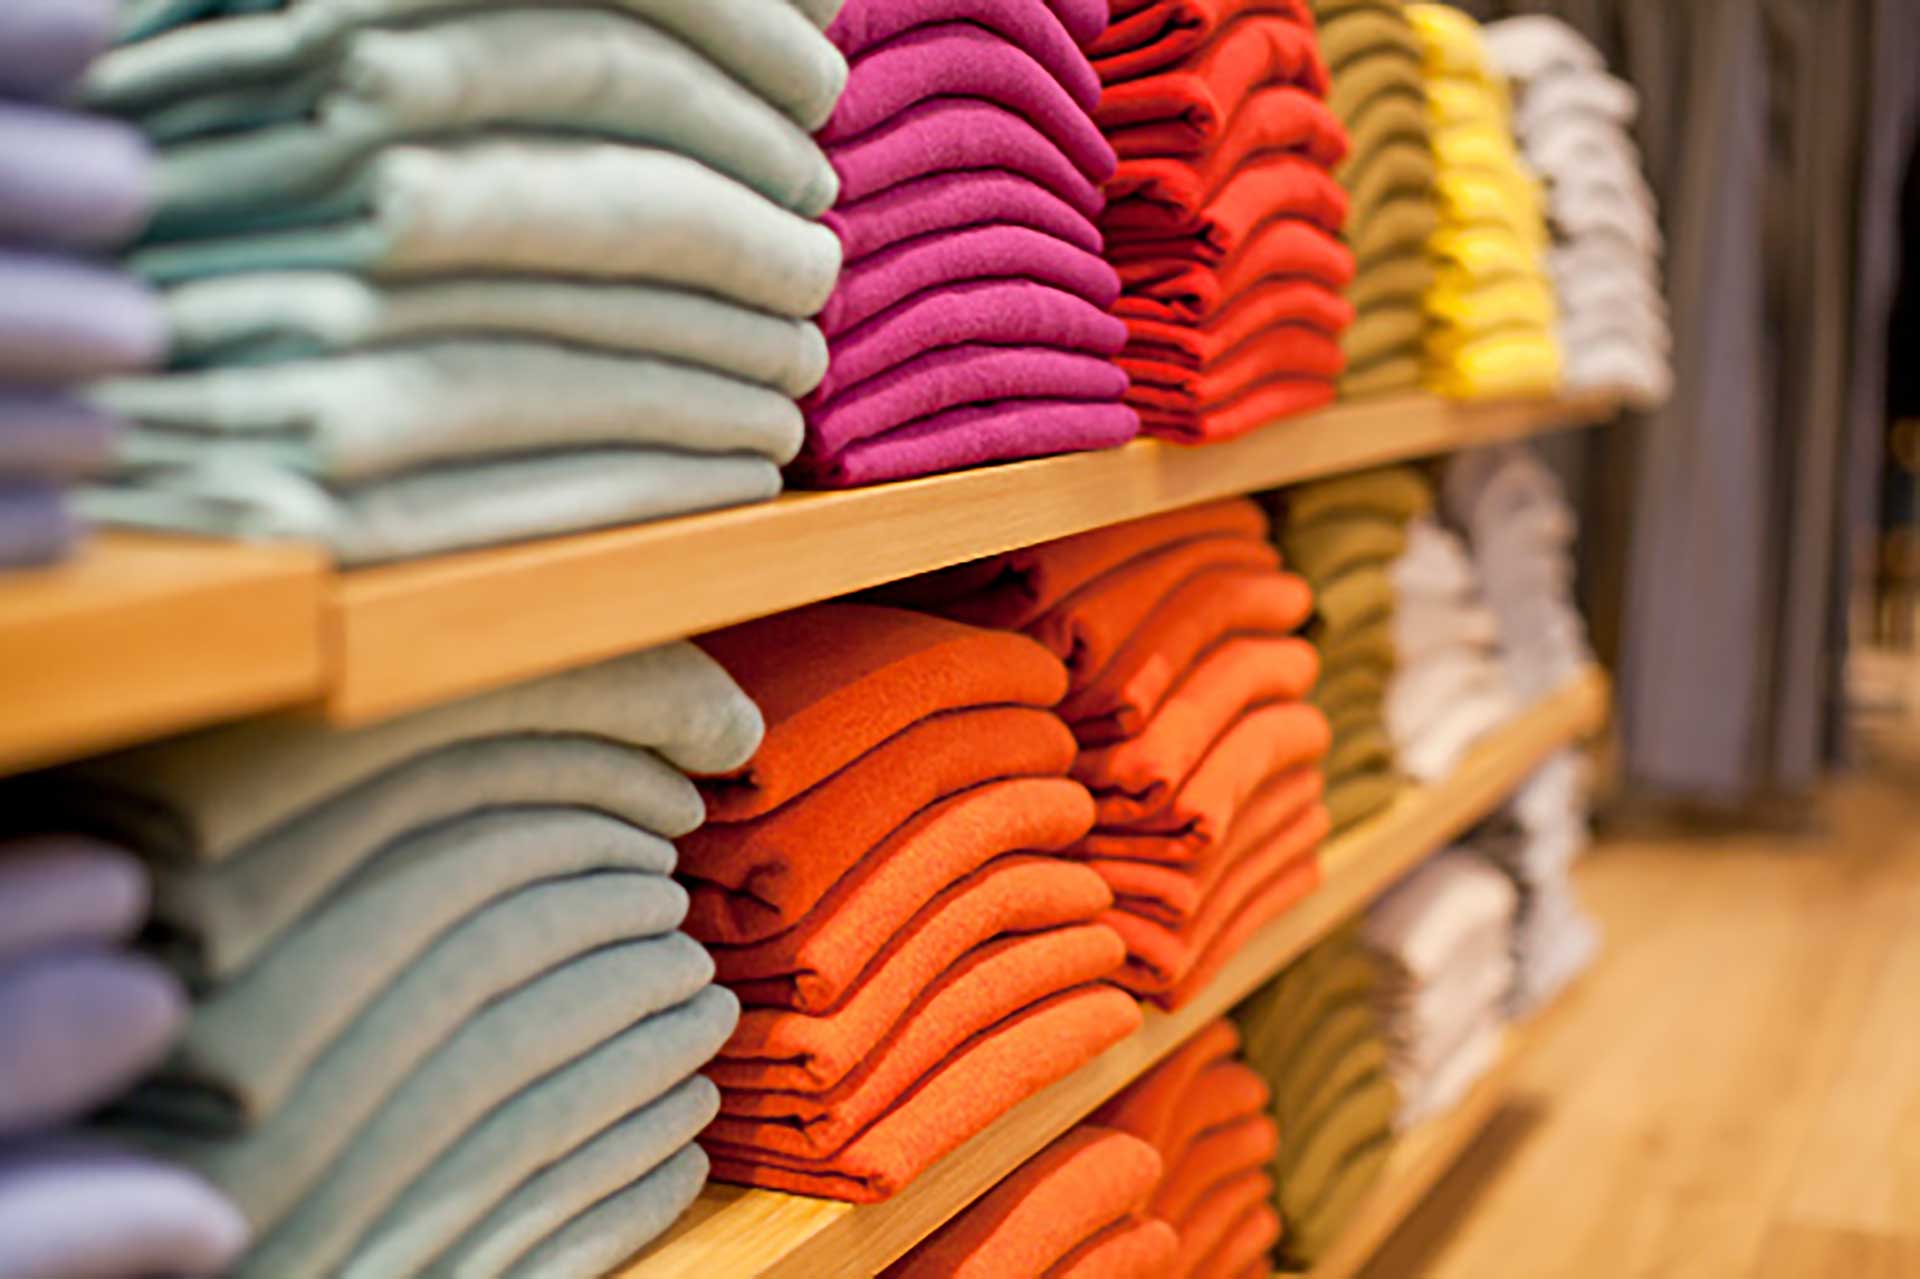 Up close picture of an organized sales tables with shirts